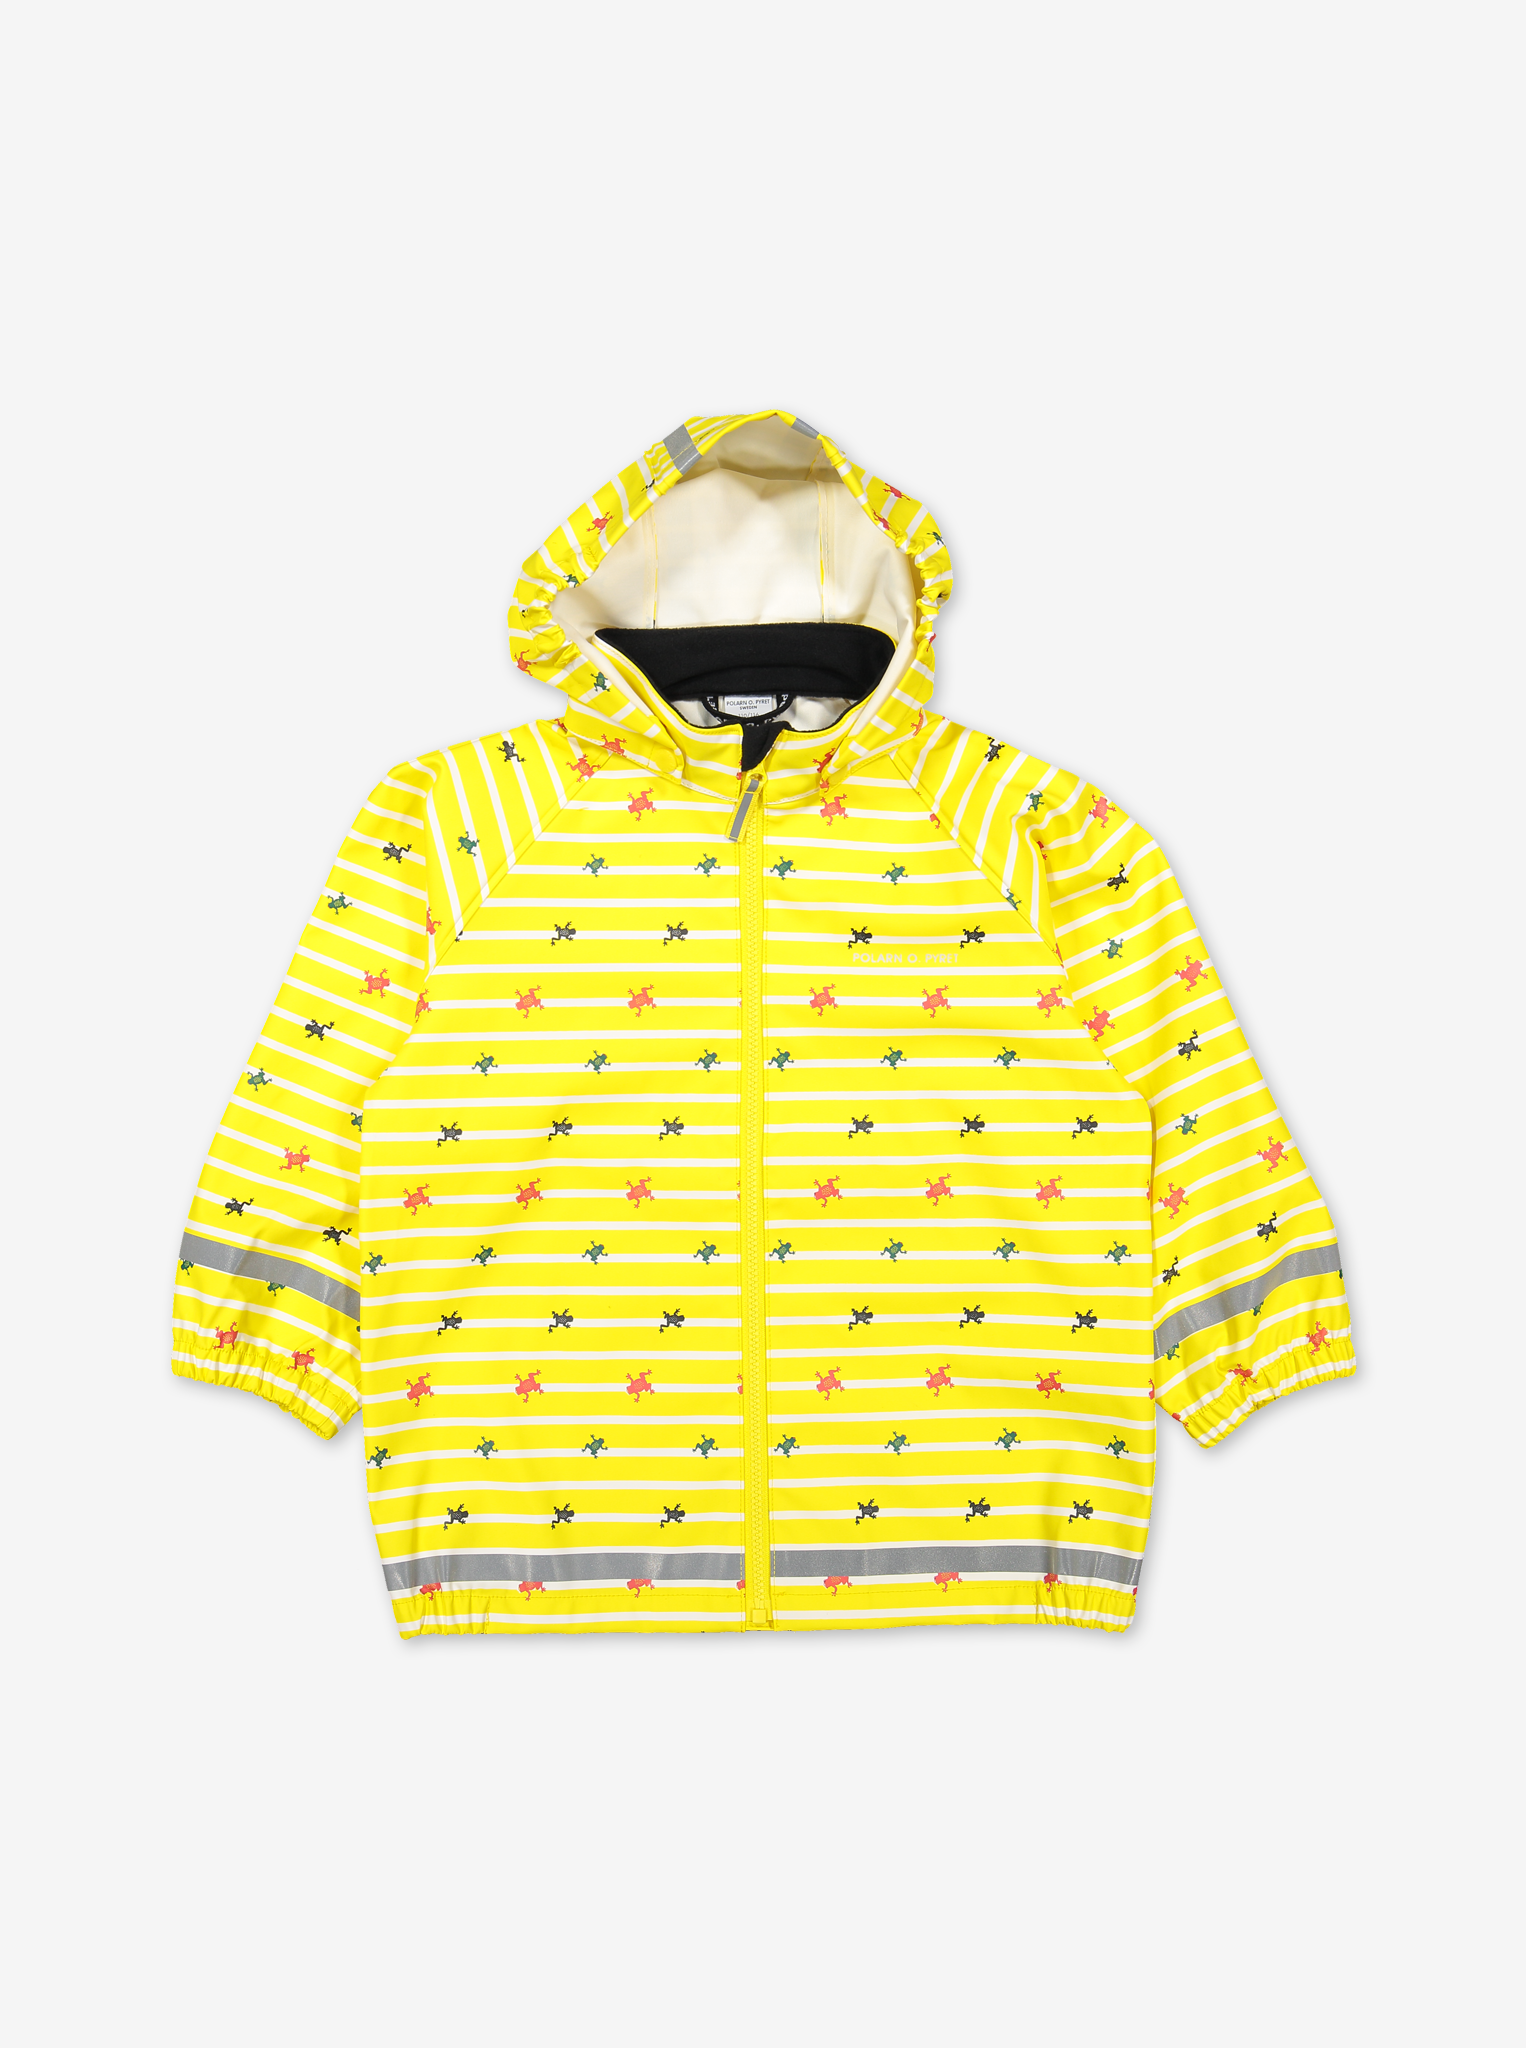 Yellow raincoat for kids with frog & stripes pattern, made of polyester, comes with a detachable hood and elastic cuffs.